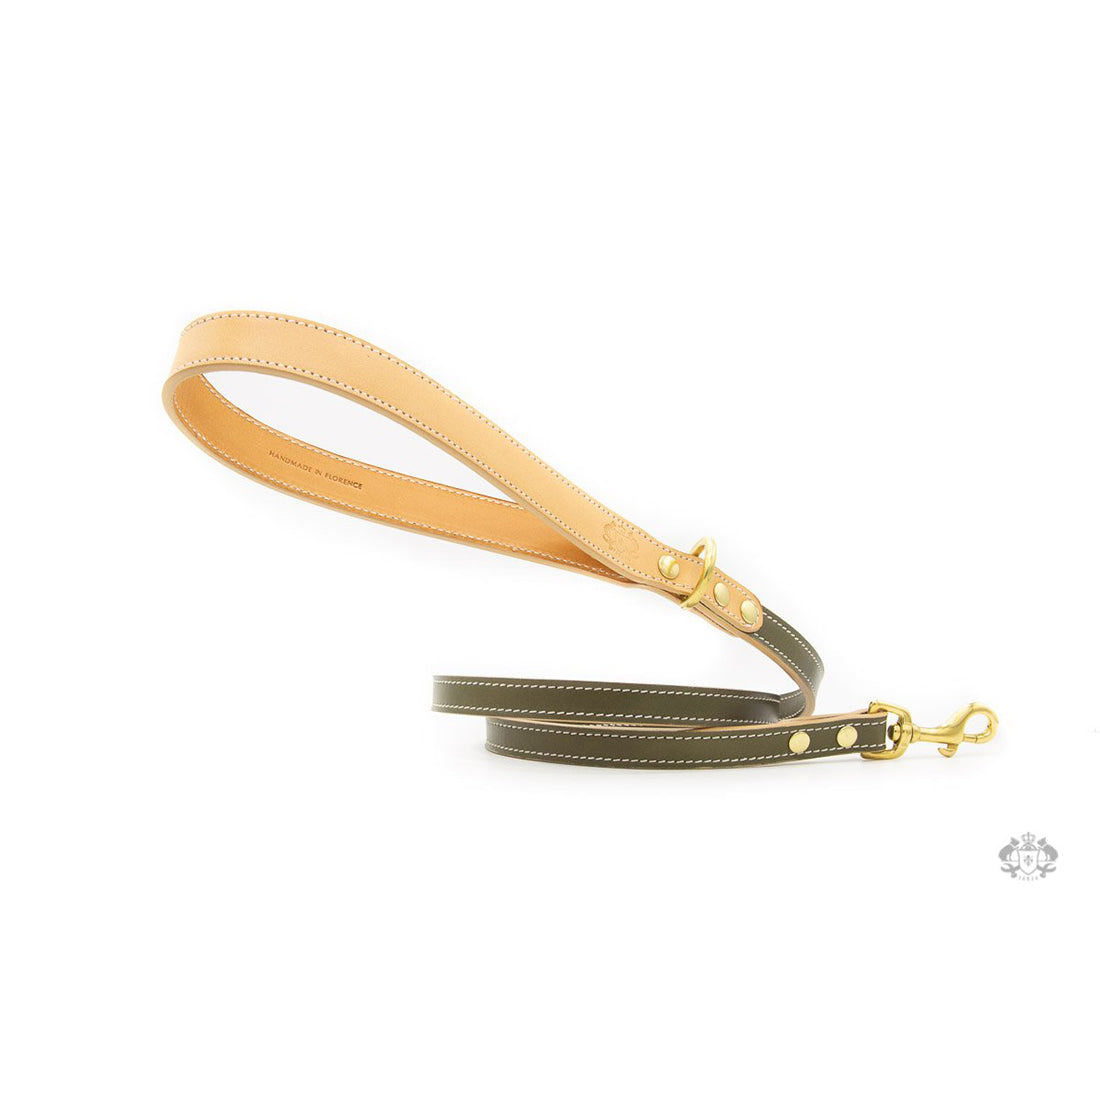 OLIVE GREEN LEATHER DOG LEAD